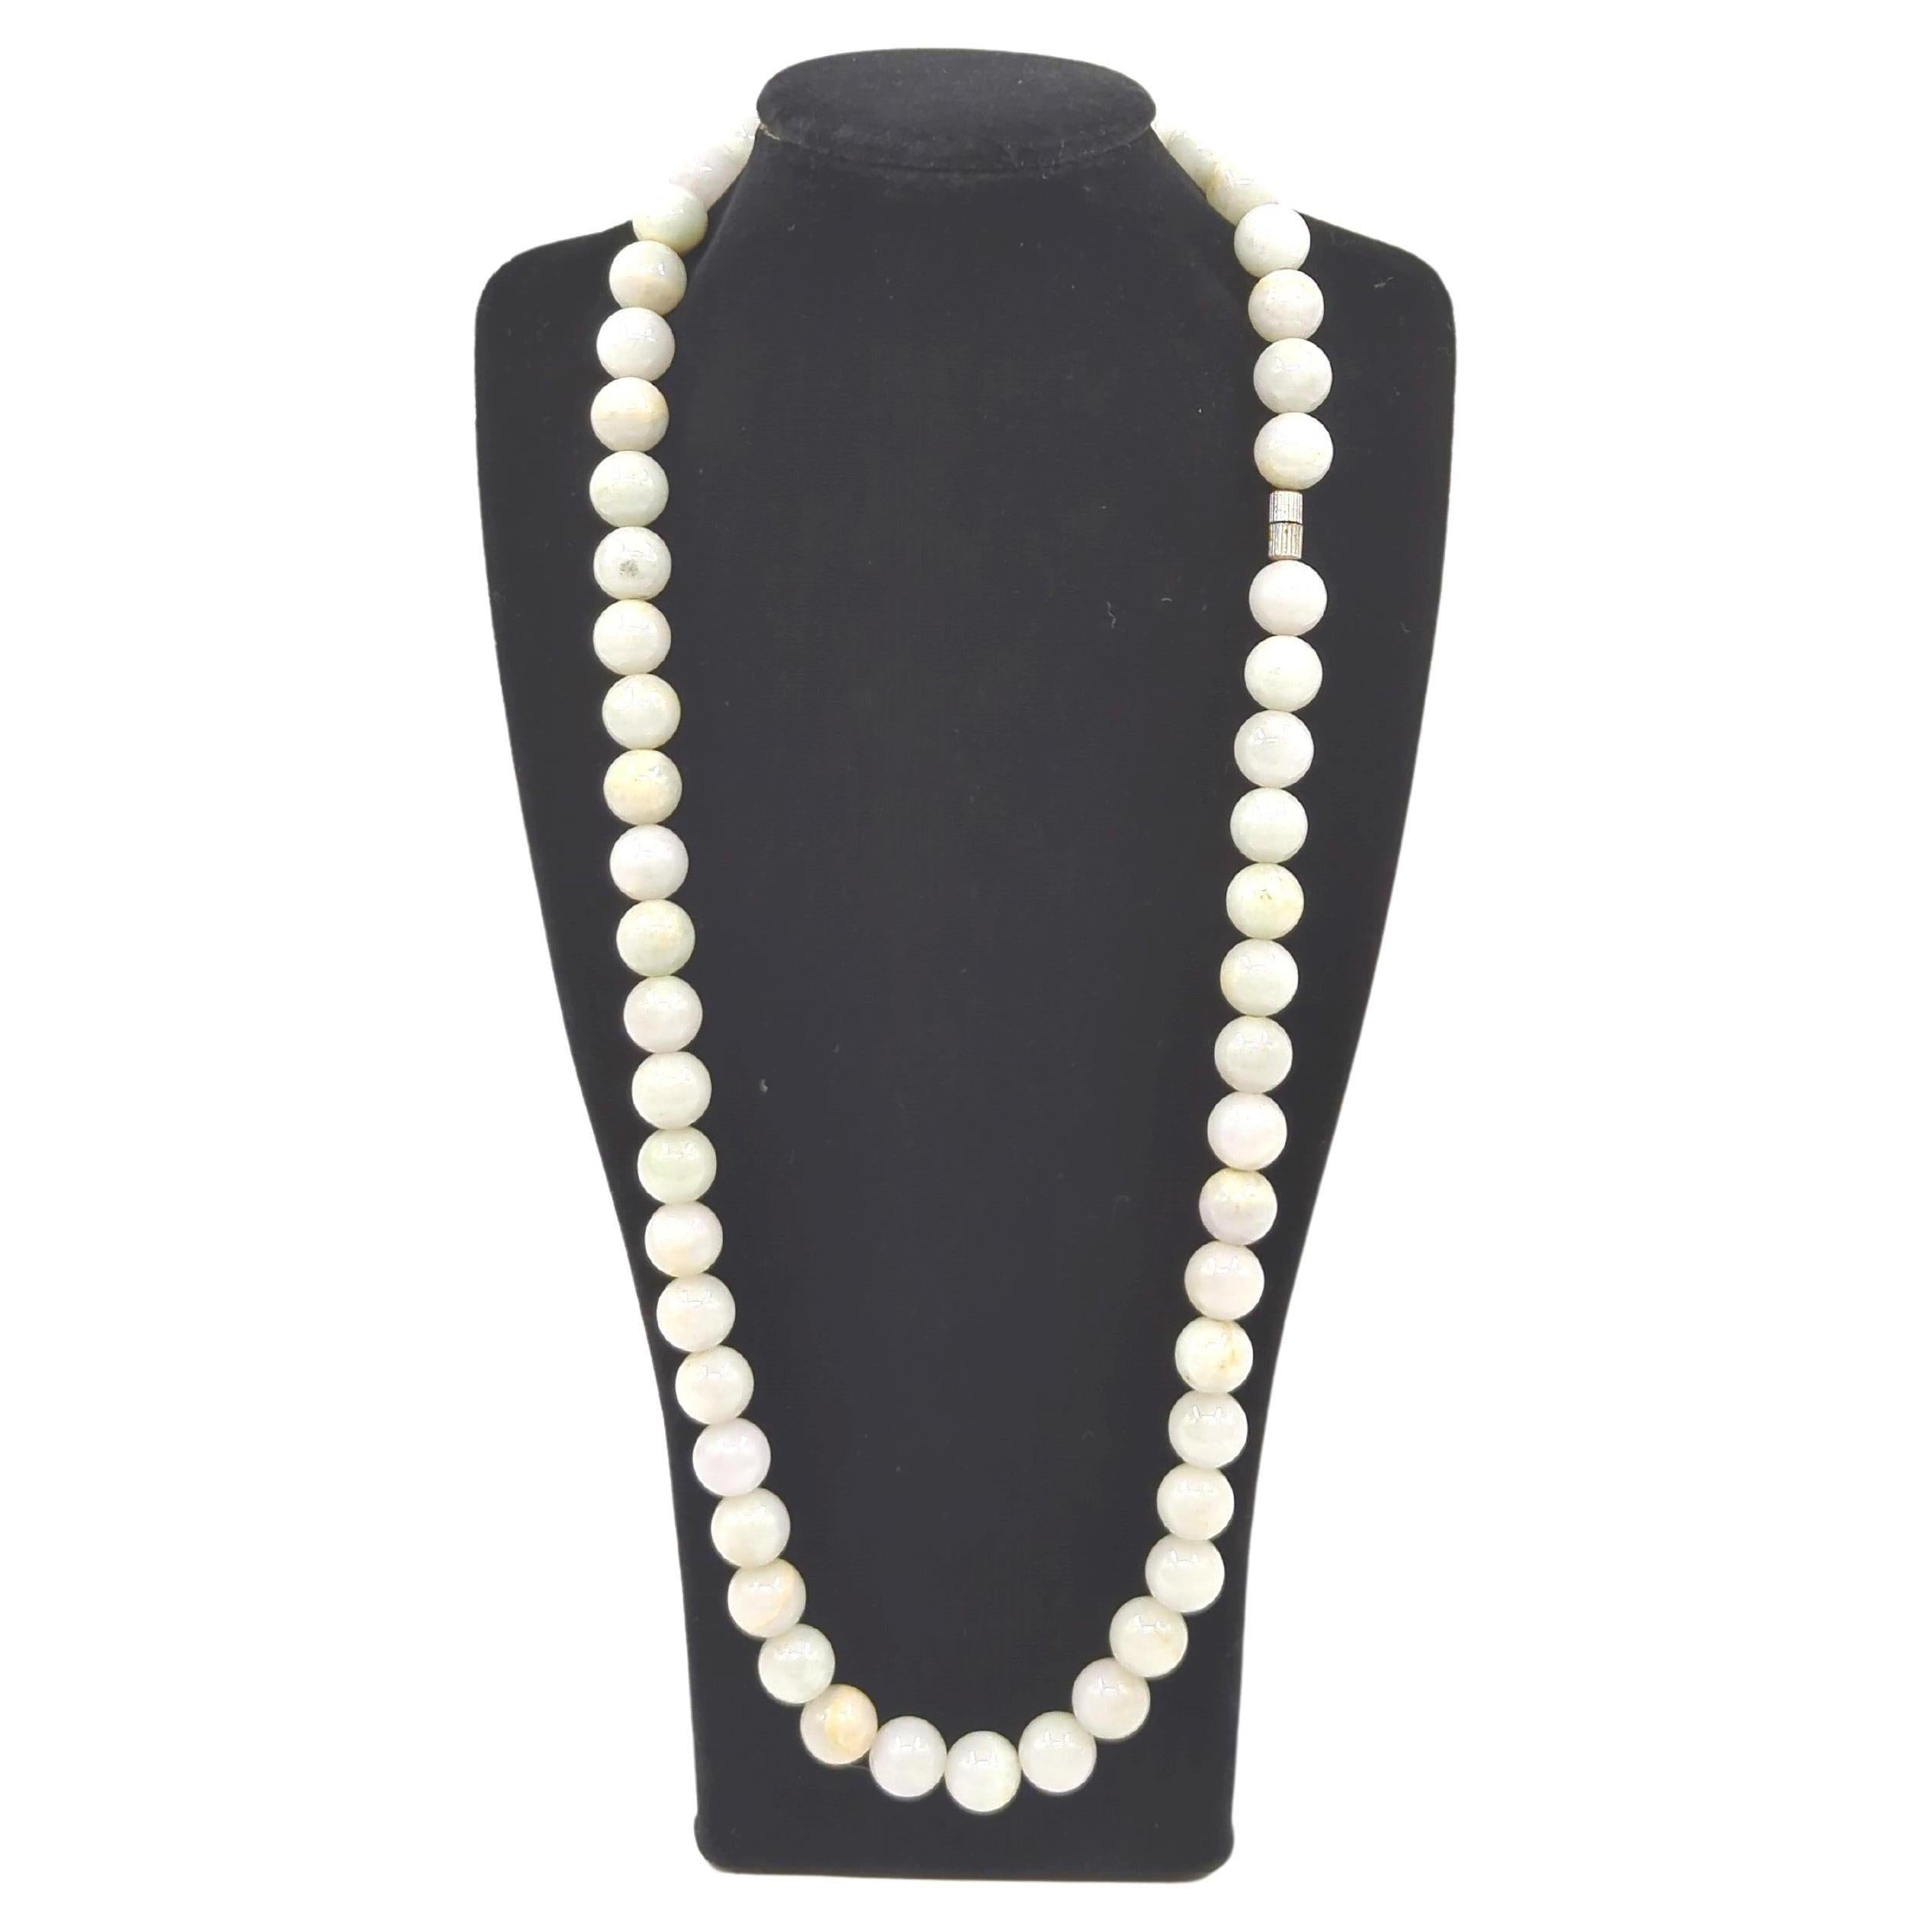 Elegant Natural White Jadeite Beaded Necklace A-Grade 55pc 11mm Beads 23